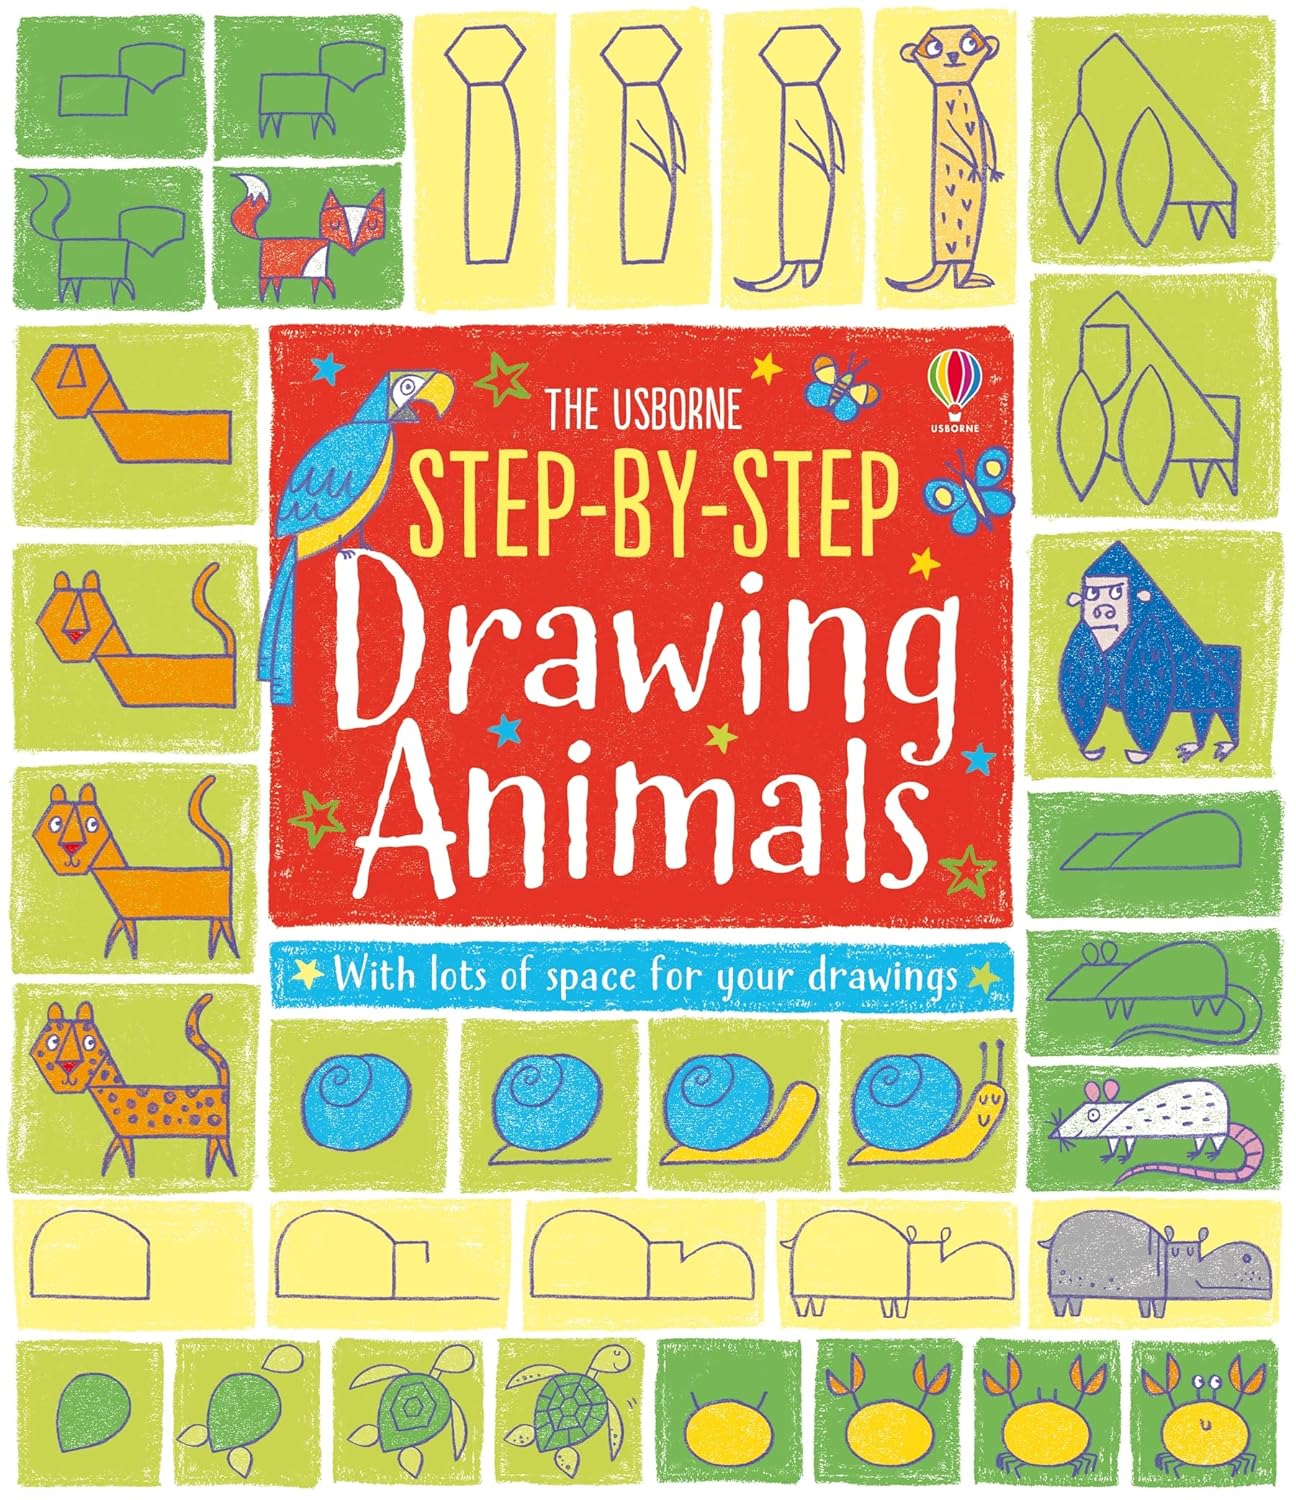 Step-by-Step Drawing Books